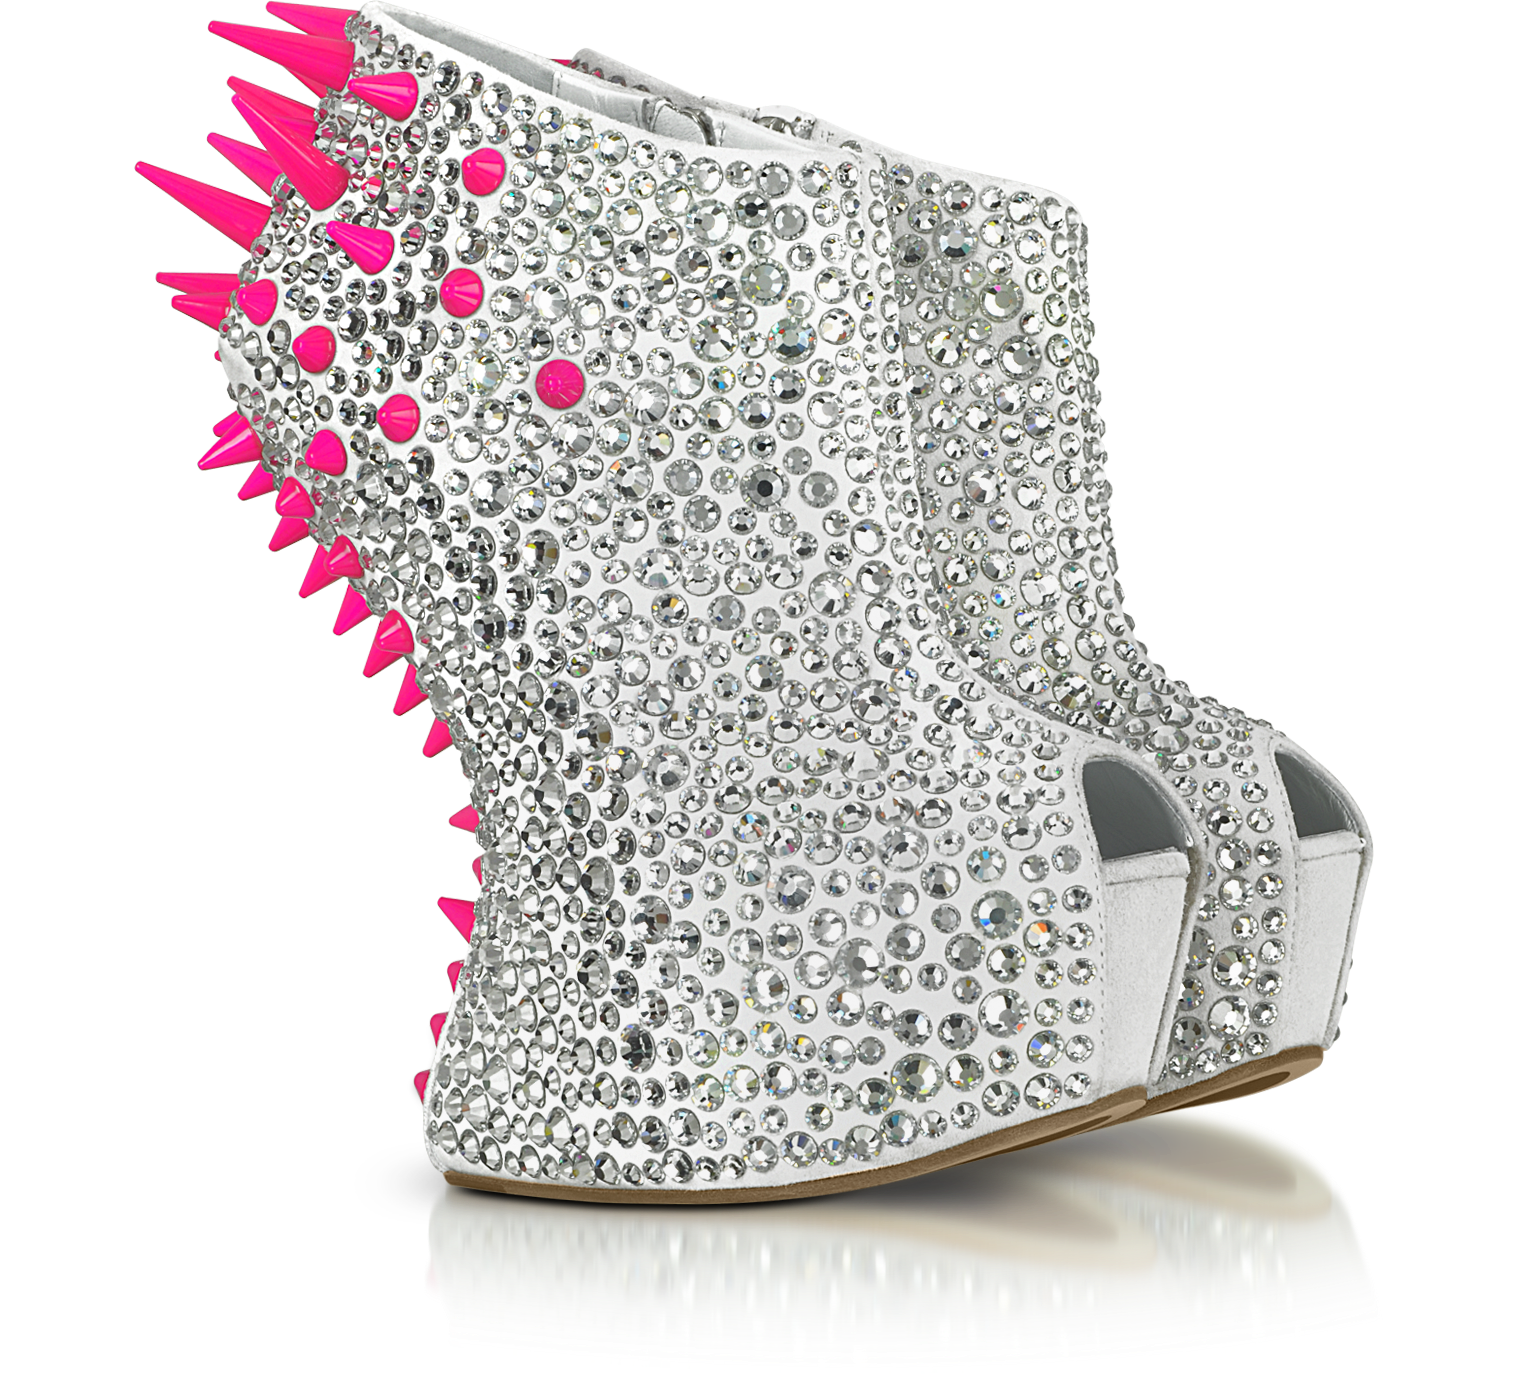 giuseppe shoes with spikes